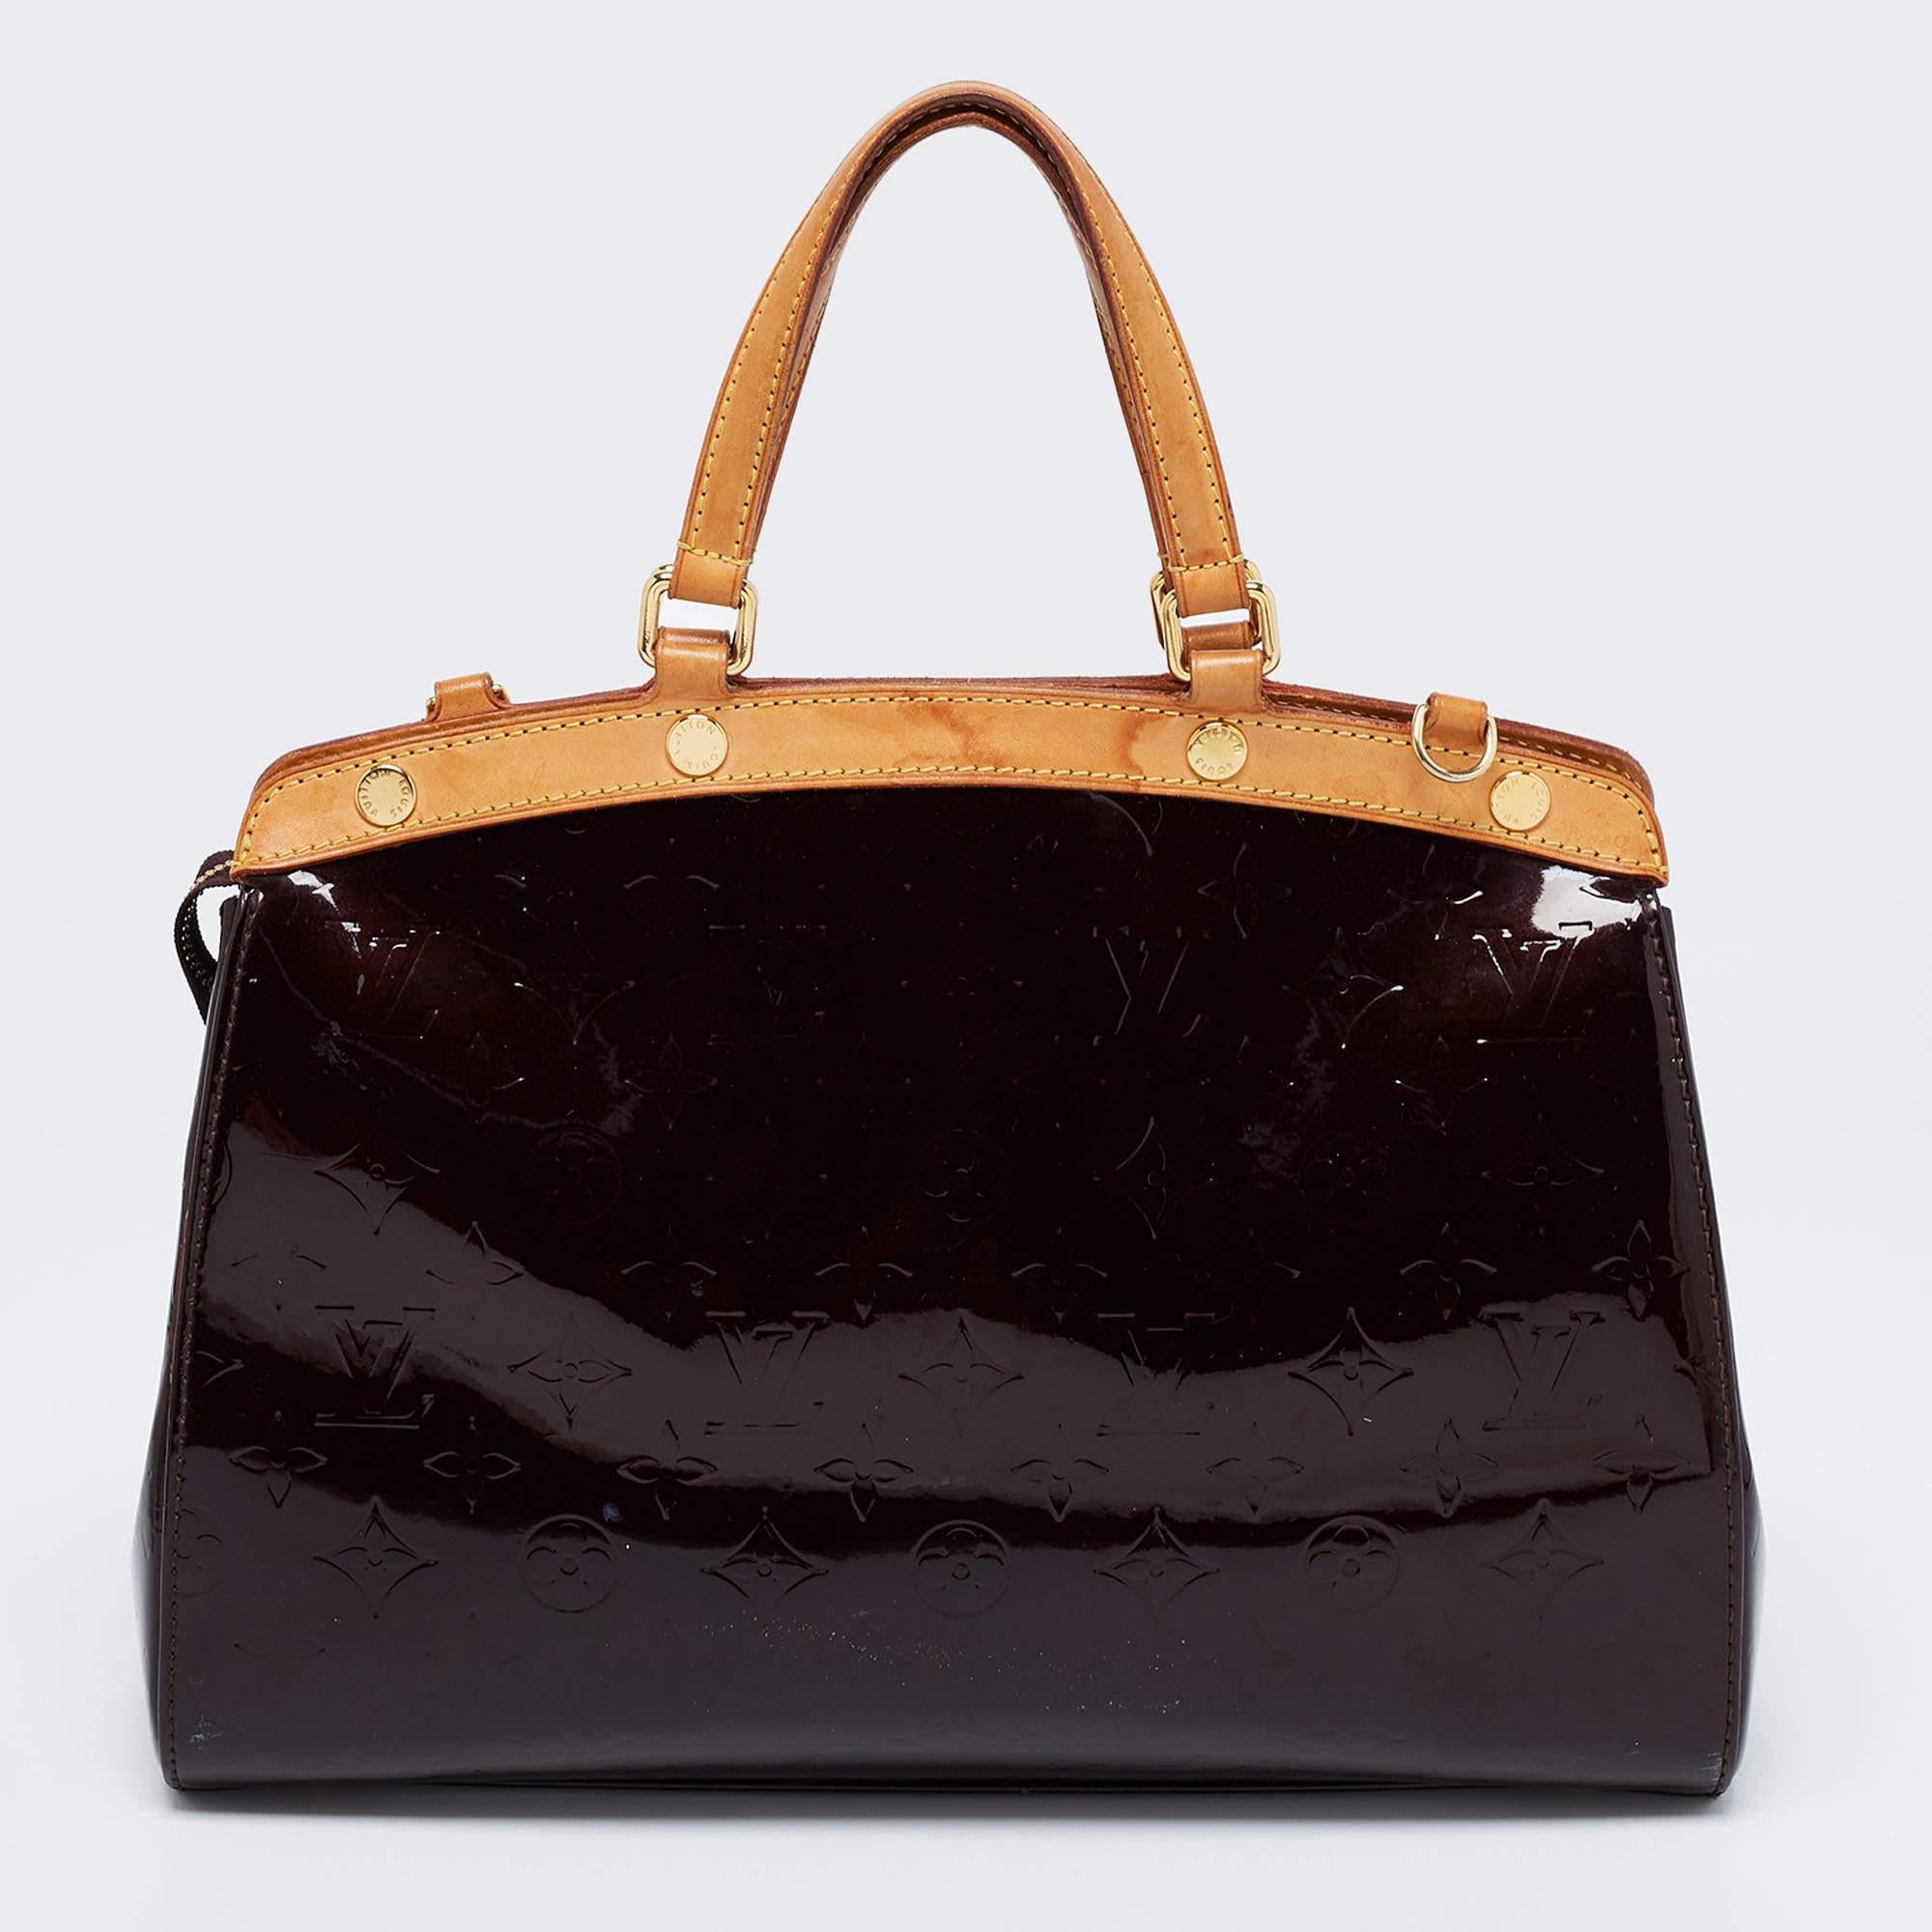 The feminine shape of Louis Vuitton's Brea is inspired by the doctor's bag. Crafted from Monogram Vernis, the bag has a fine finish. The fabric interior is spacious, and it is secured by a zipper. The bag features double handles, a shoulder strap,